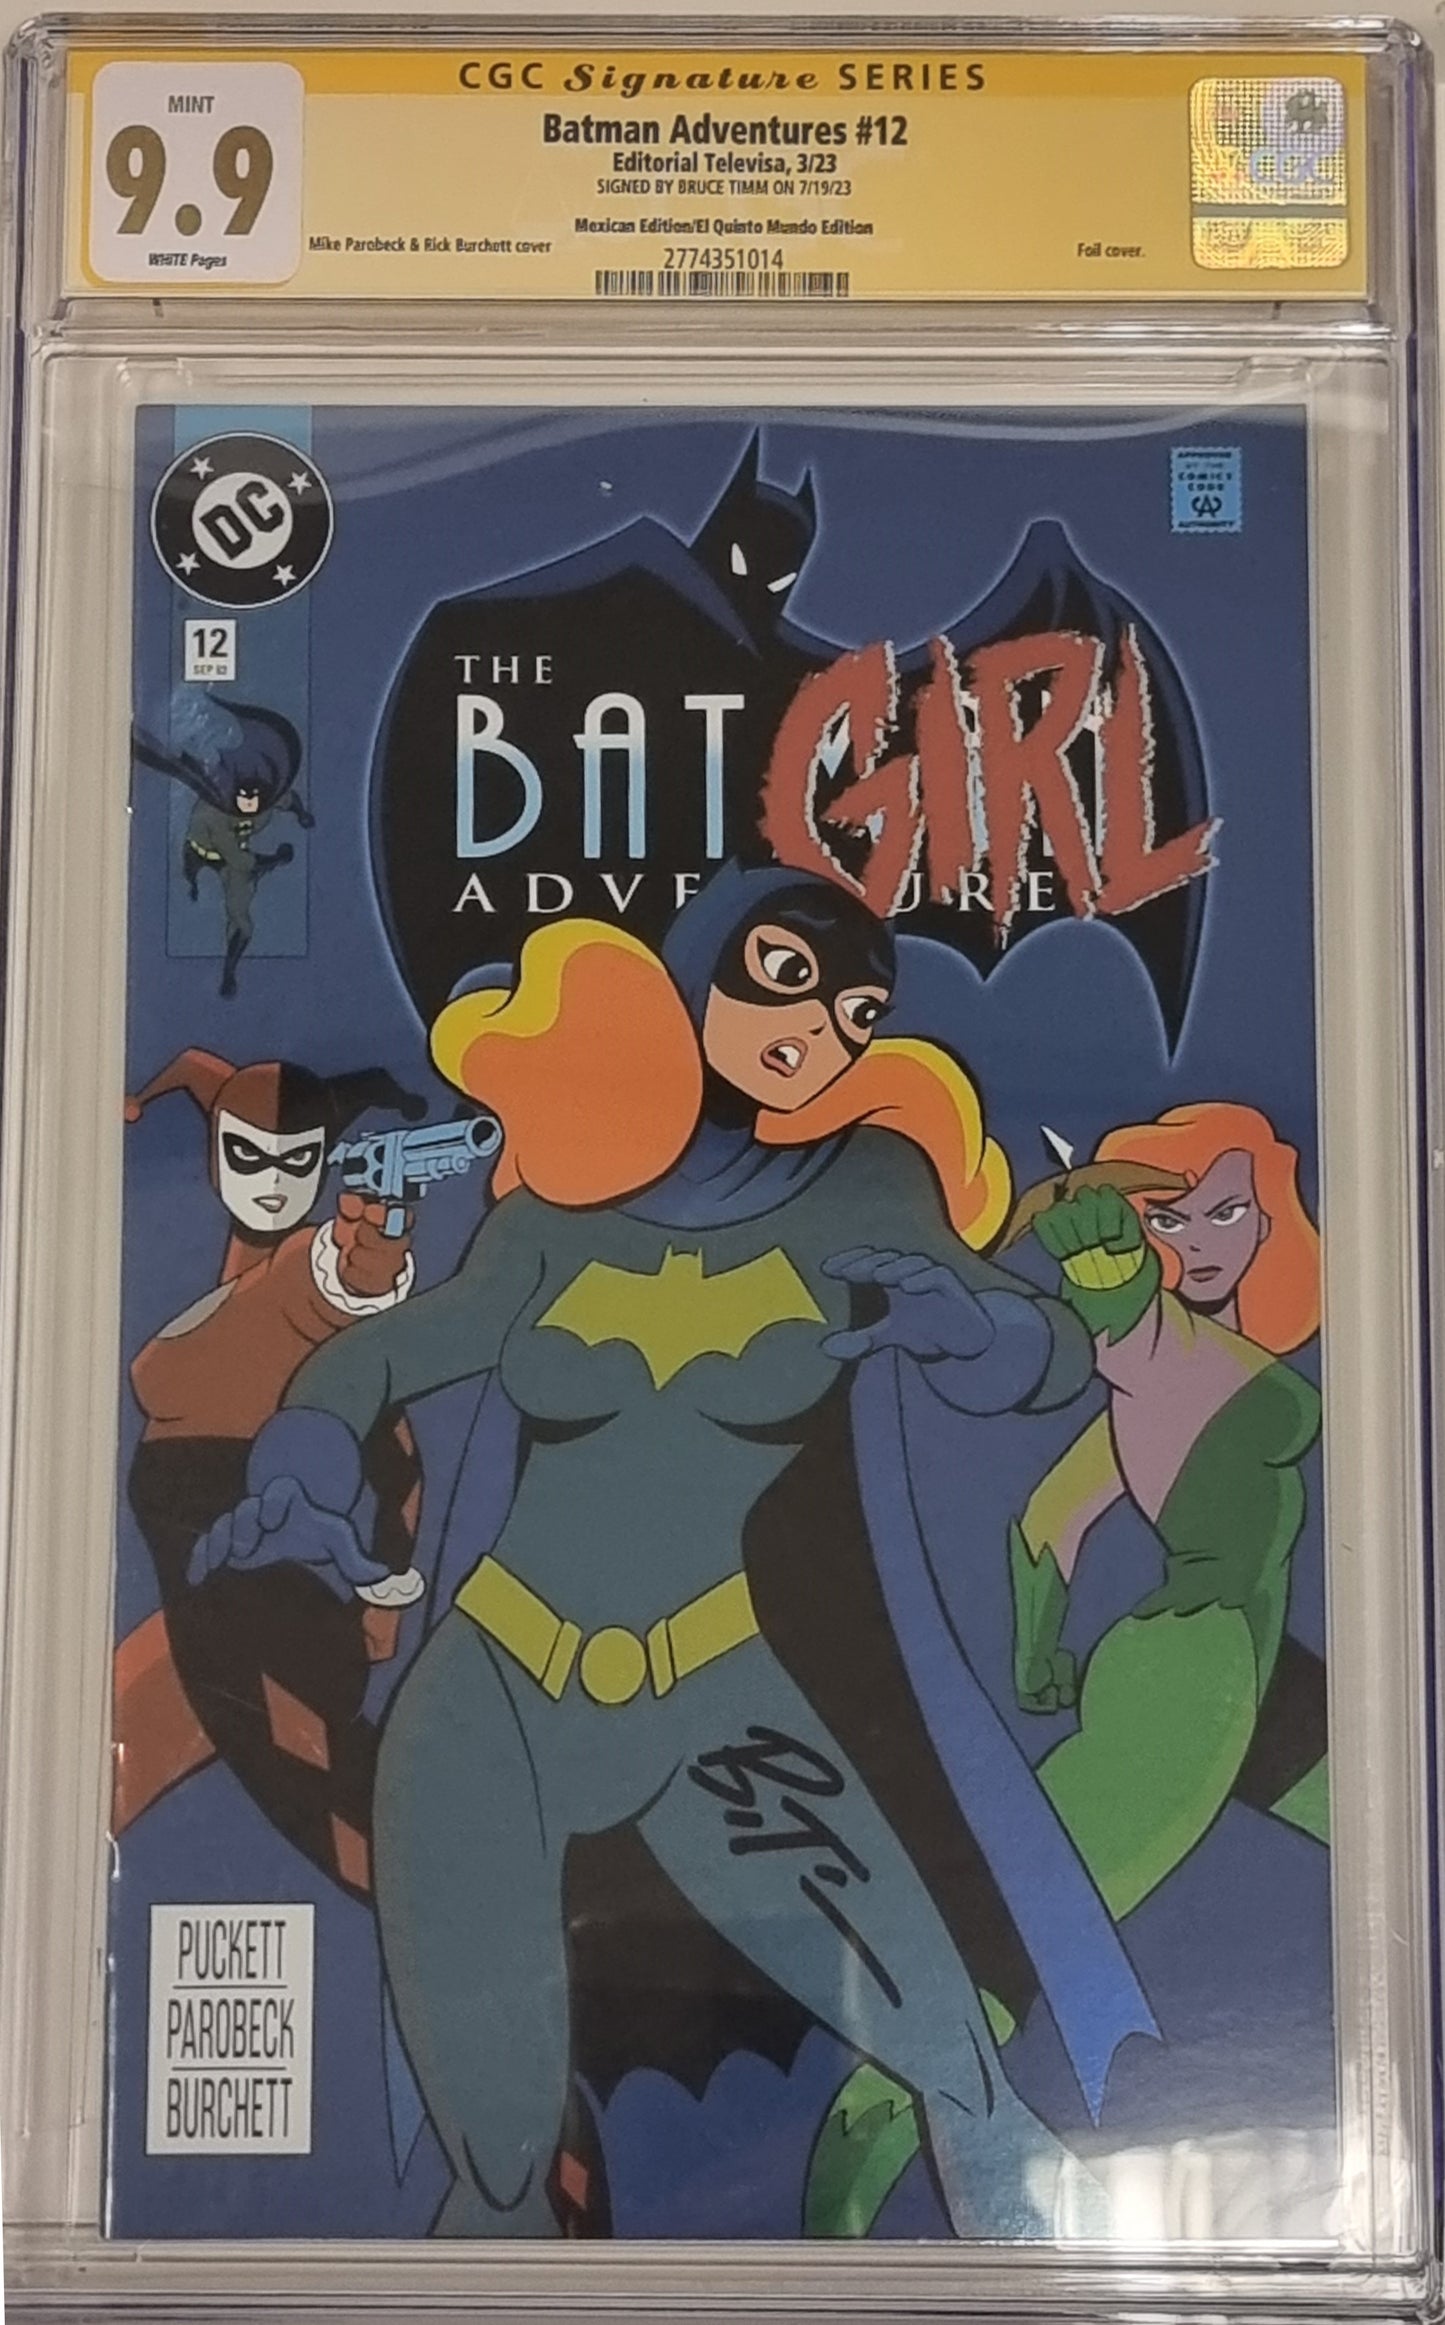 BATMAN ADVENTURES #12 MEXICAN FOIL VARIANT LIMITED TO 1000 COPIES - 1ST APP HARLEY QUINN -  SIGNED BY BRUCE TIMM CGC 9.9